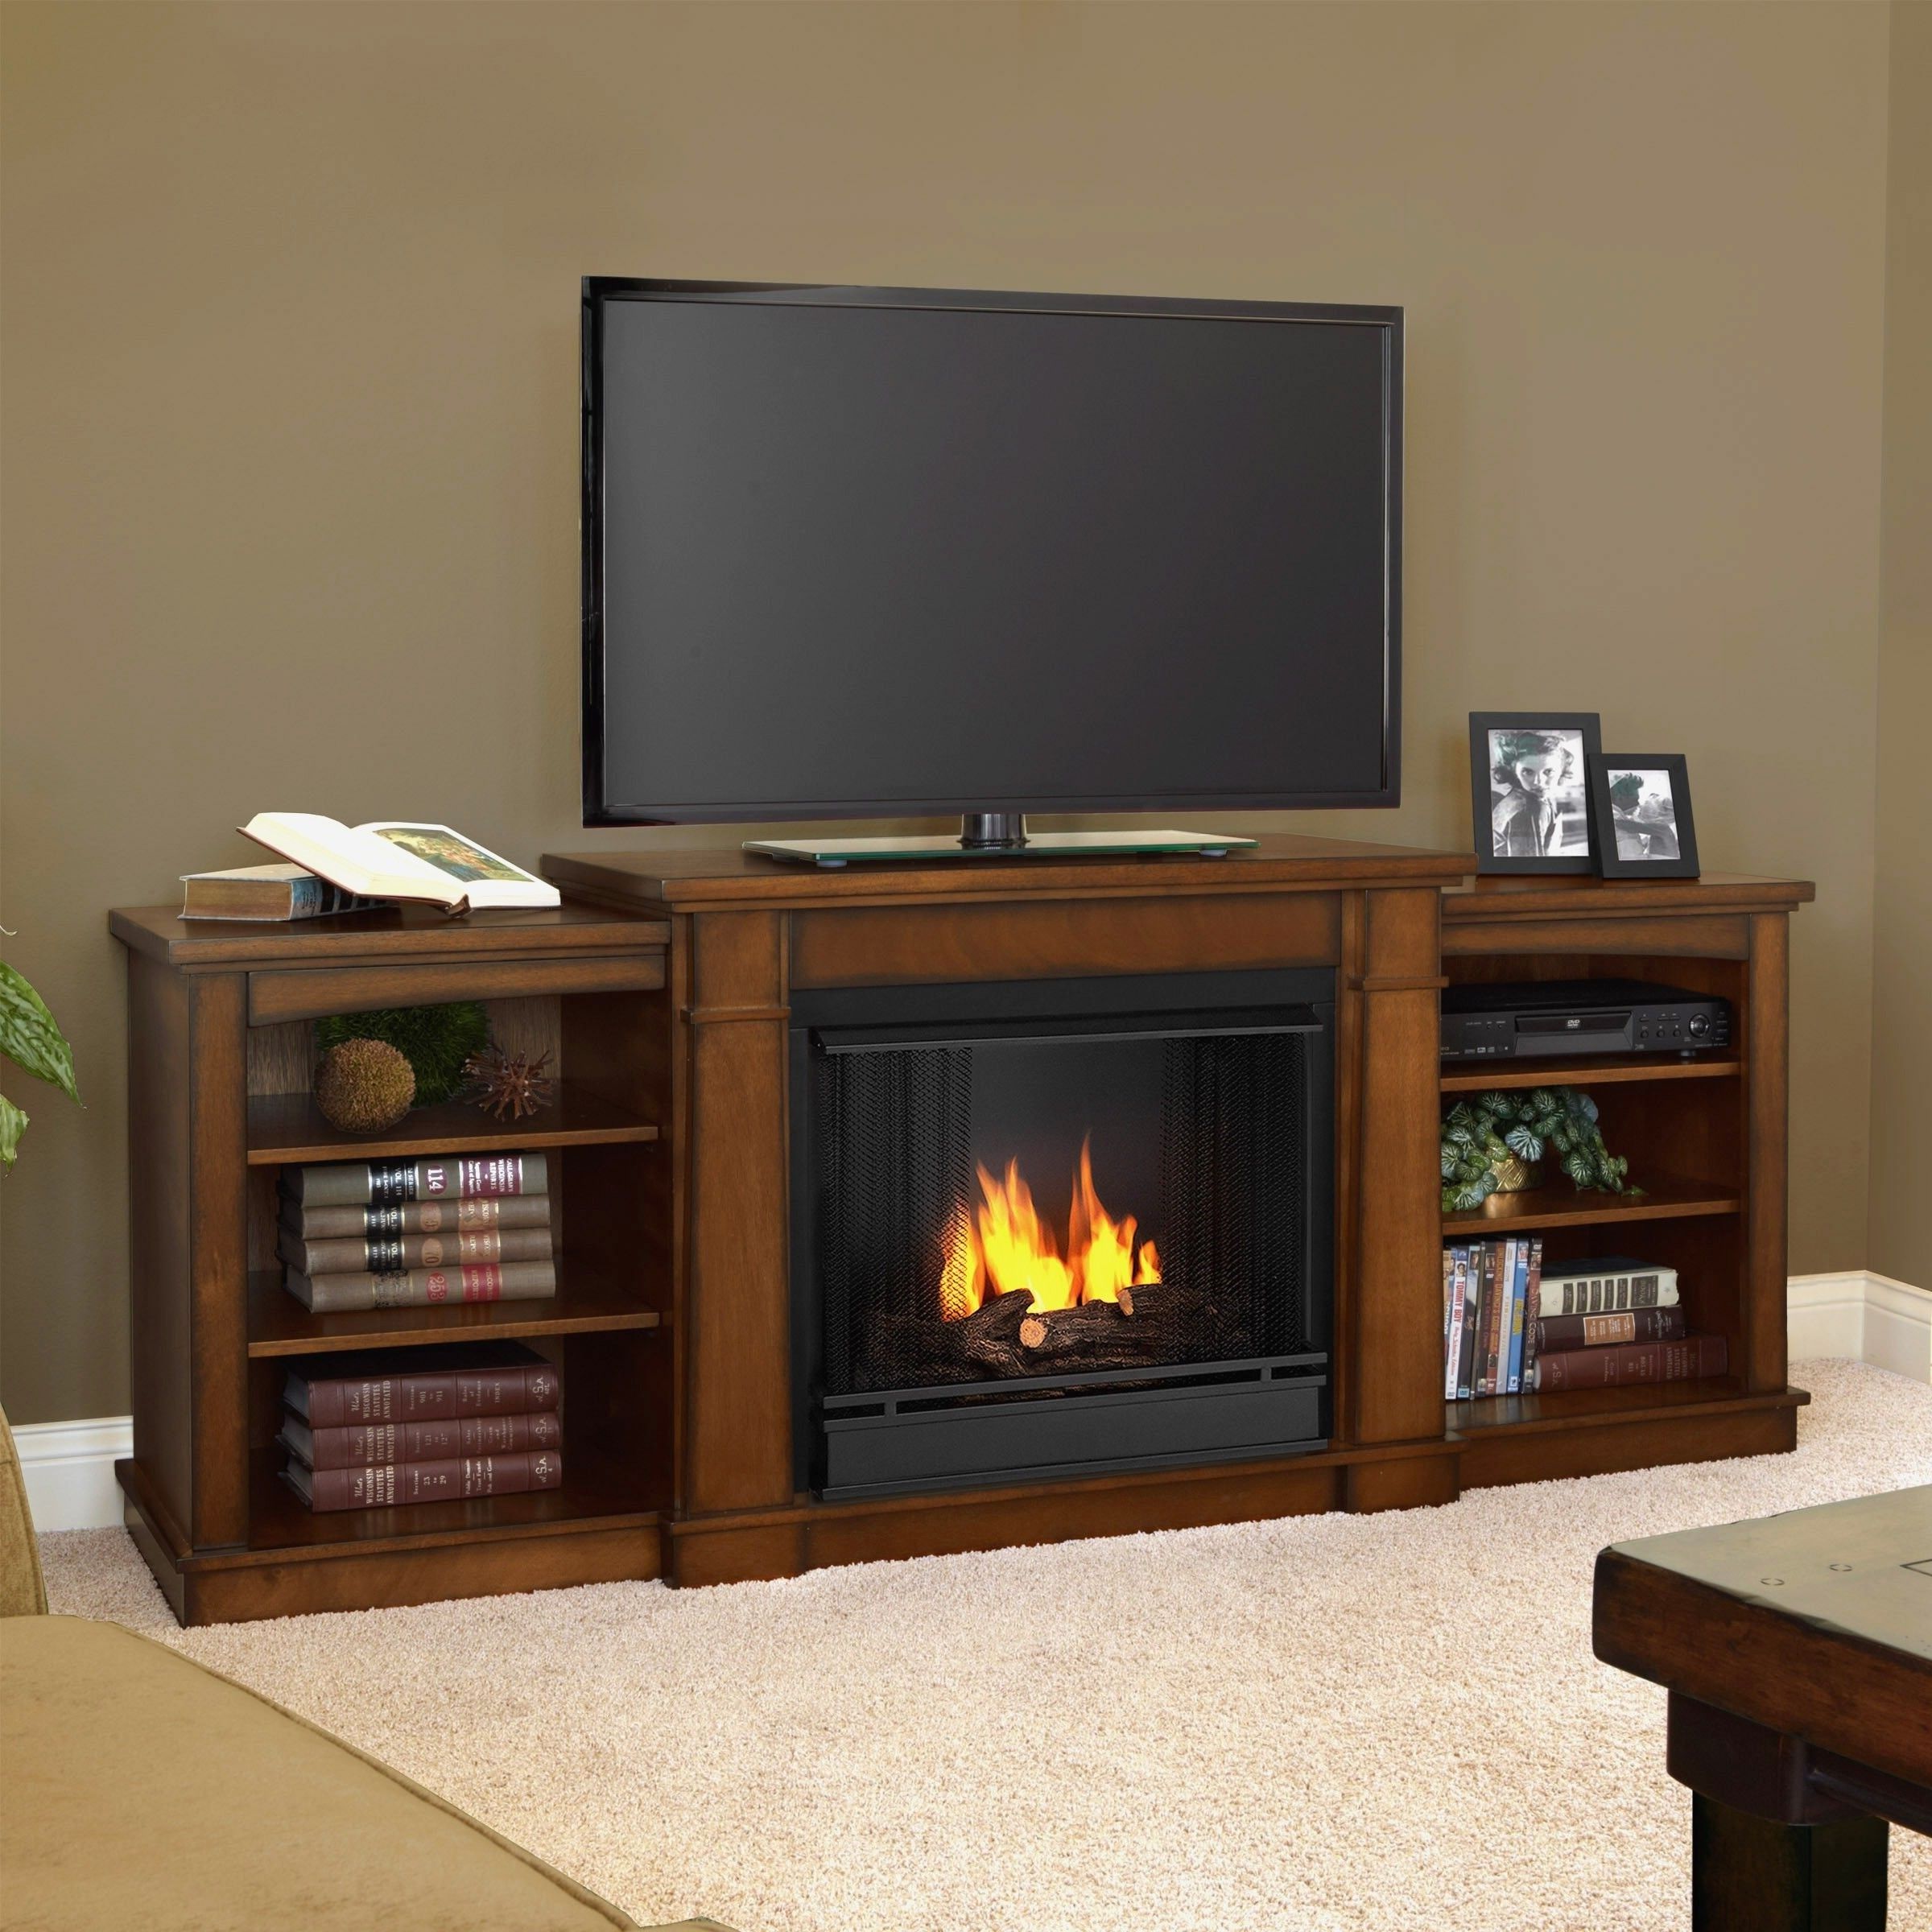 Modern Fireplace Tv Stands Within Newest Fireplace Tv Stands For Flat Screens – Foter (View 15 of 15)